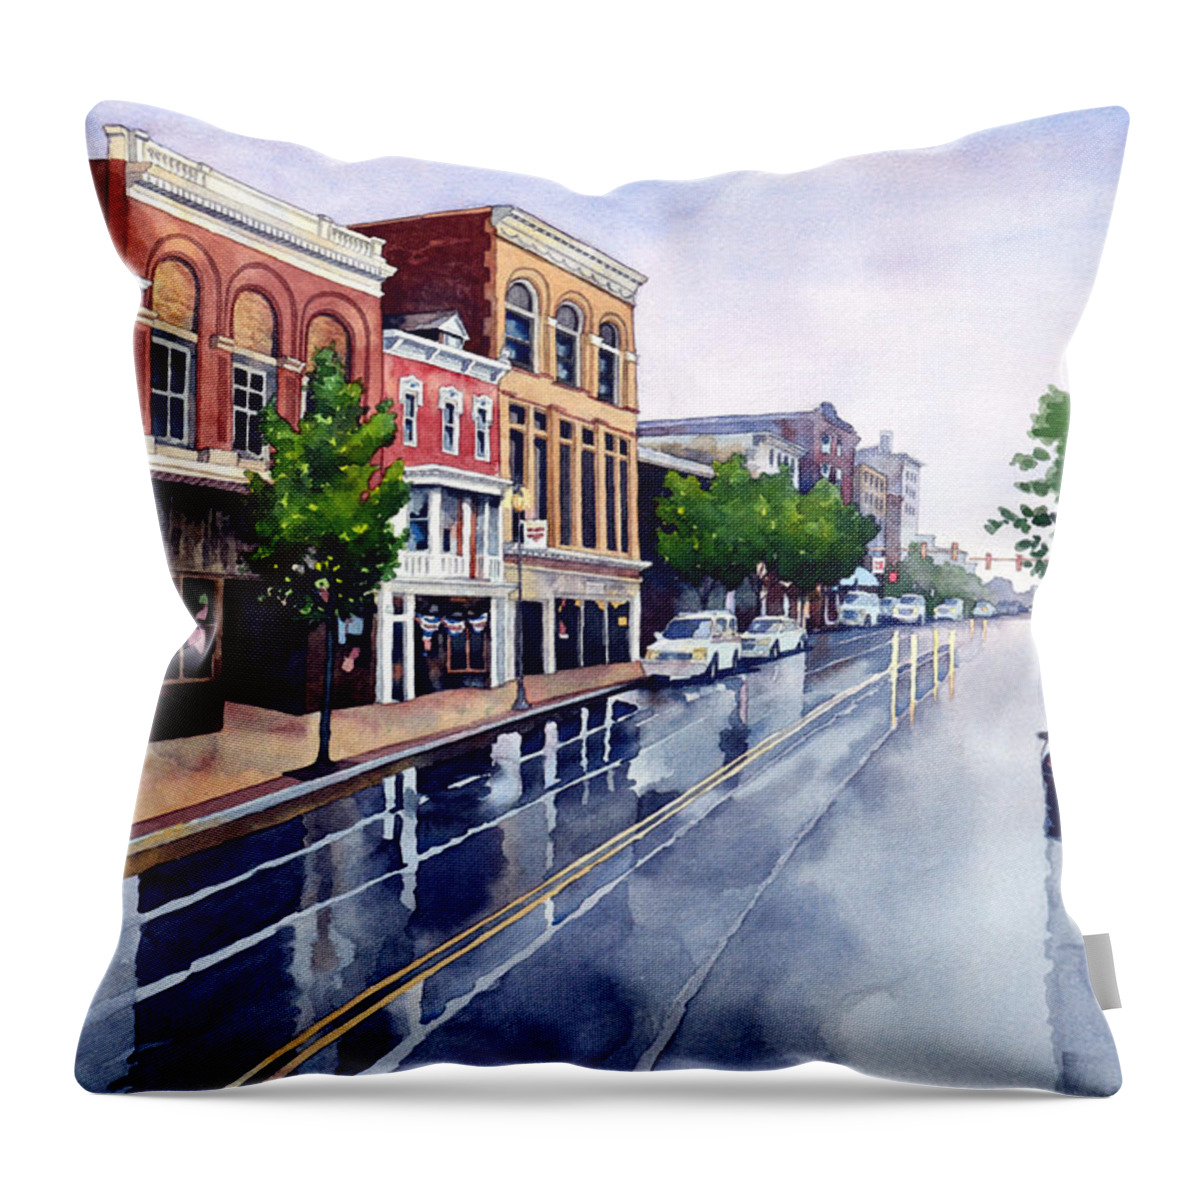 #landscape #cityscape #watercolor #rain #rainy #reflections #fineart #buildings Throw Pillow featuring the painting Gaslights and Afternoon Rain by Mick Williams